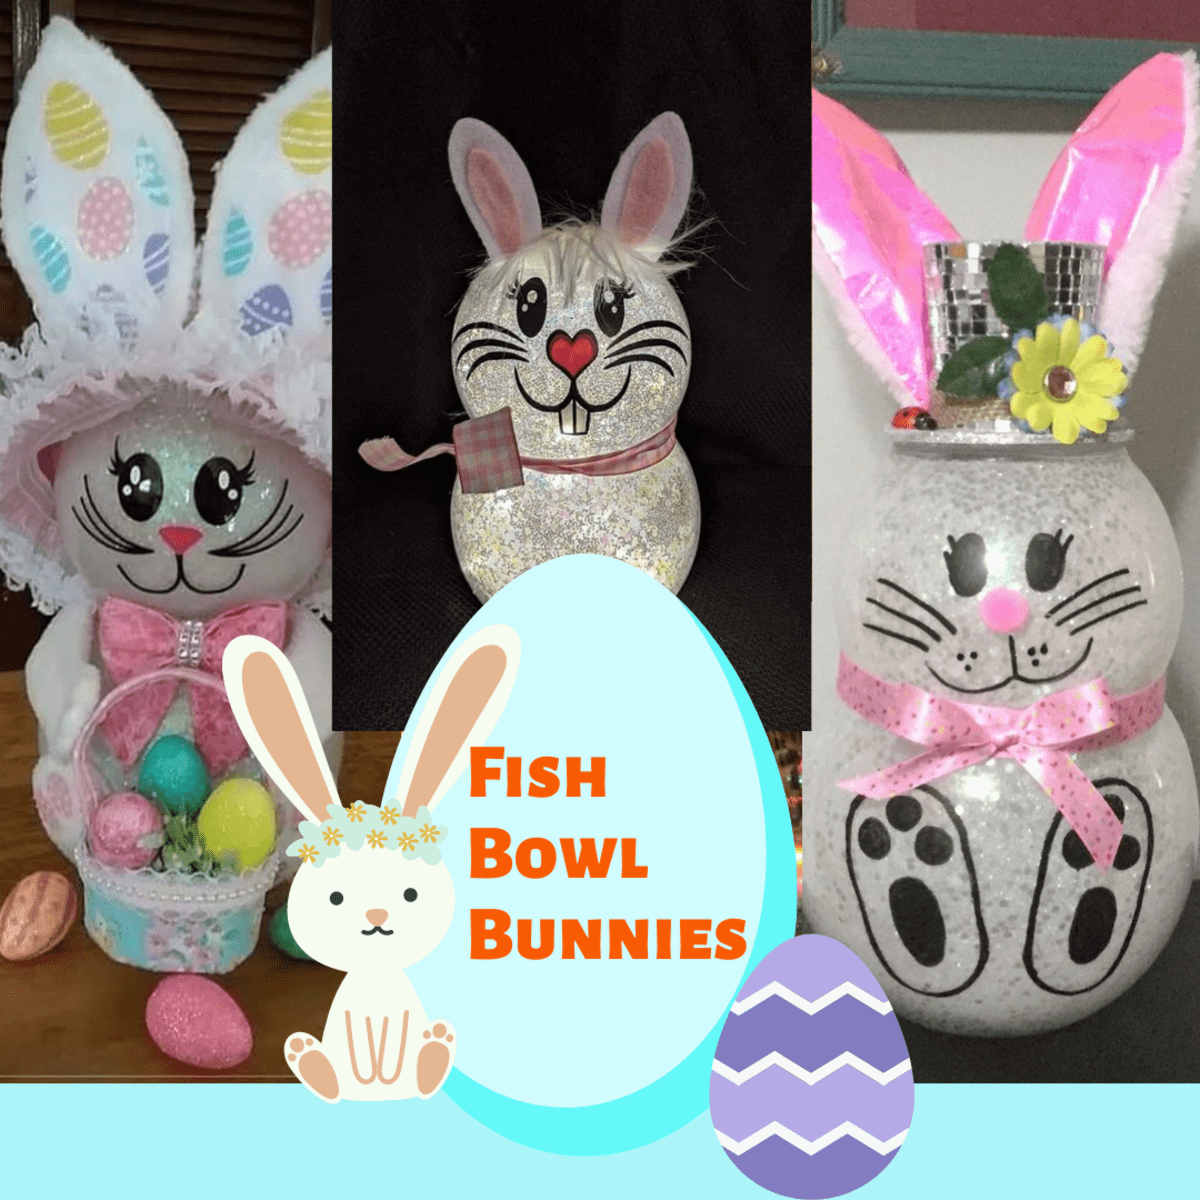 20+ Dollar Store Easter Crafts - Fish Bowl Bunnies - HubPages